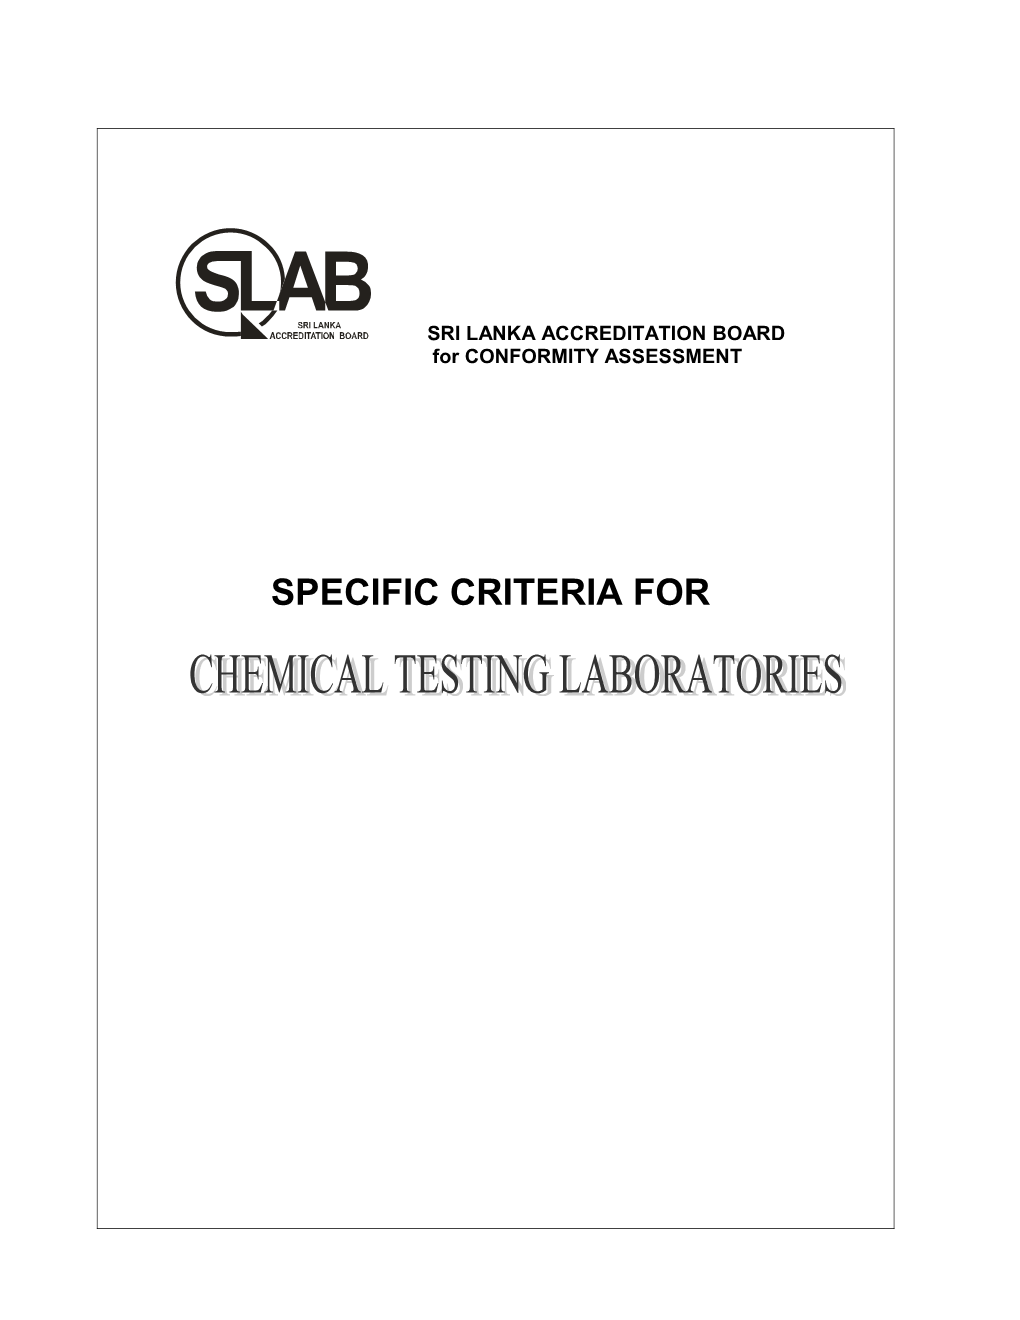 Applicable Product Groups in Chemical Testing